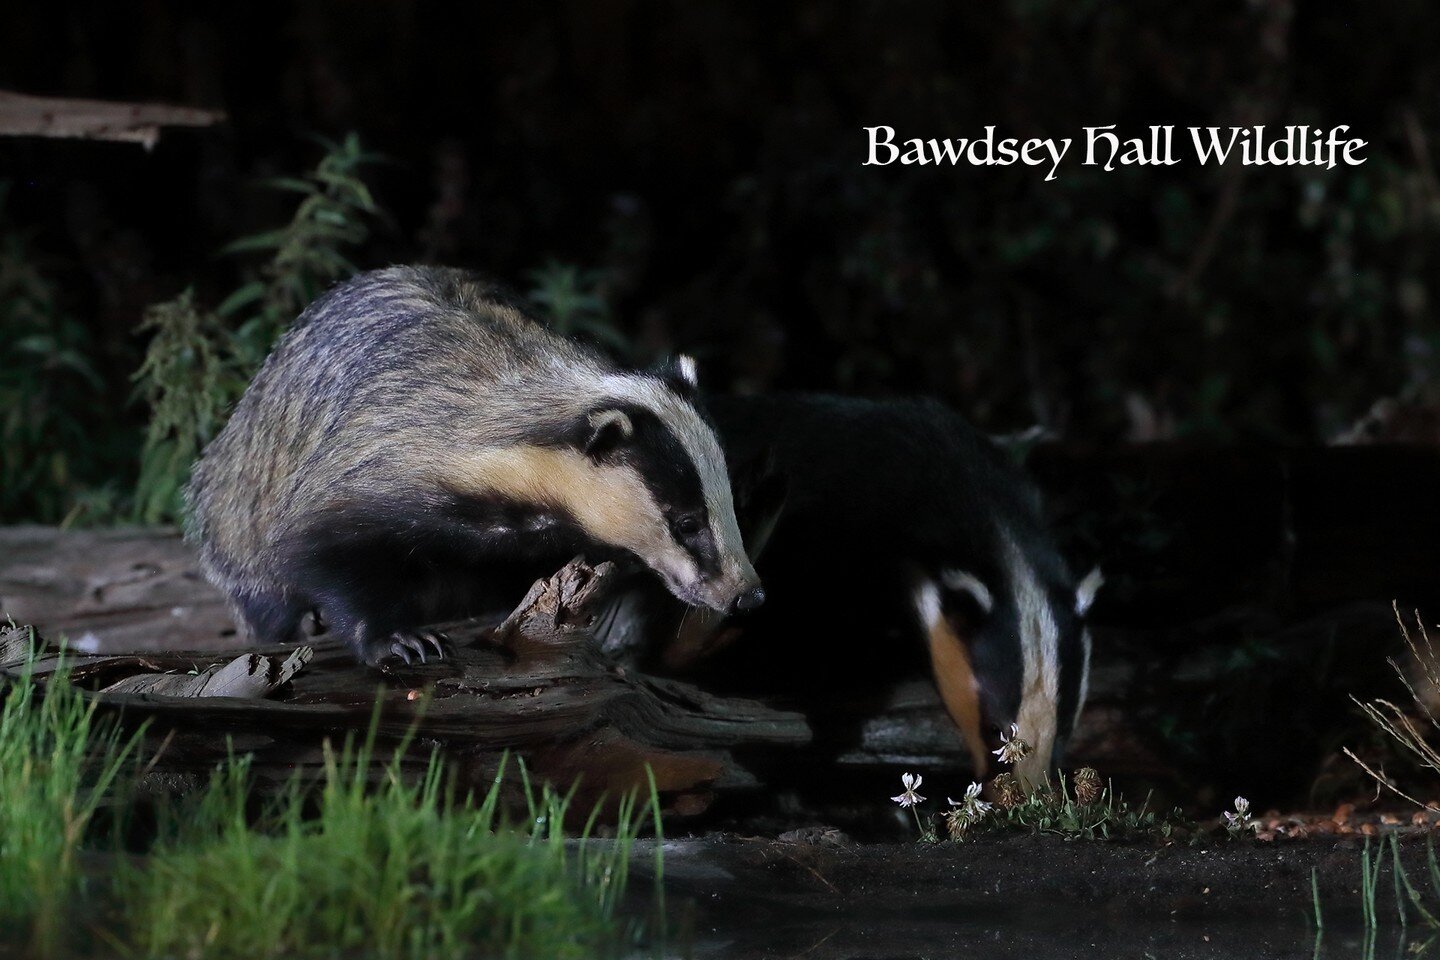 What could be better badgers and polecats!!!

If you want great photography opportunities with badgers book now&hellip;.the badgers have been visiting multiple times with cubs. Polecat and kits visiting too multiple times!!!!

Spaces still available 